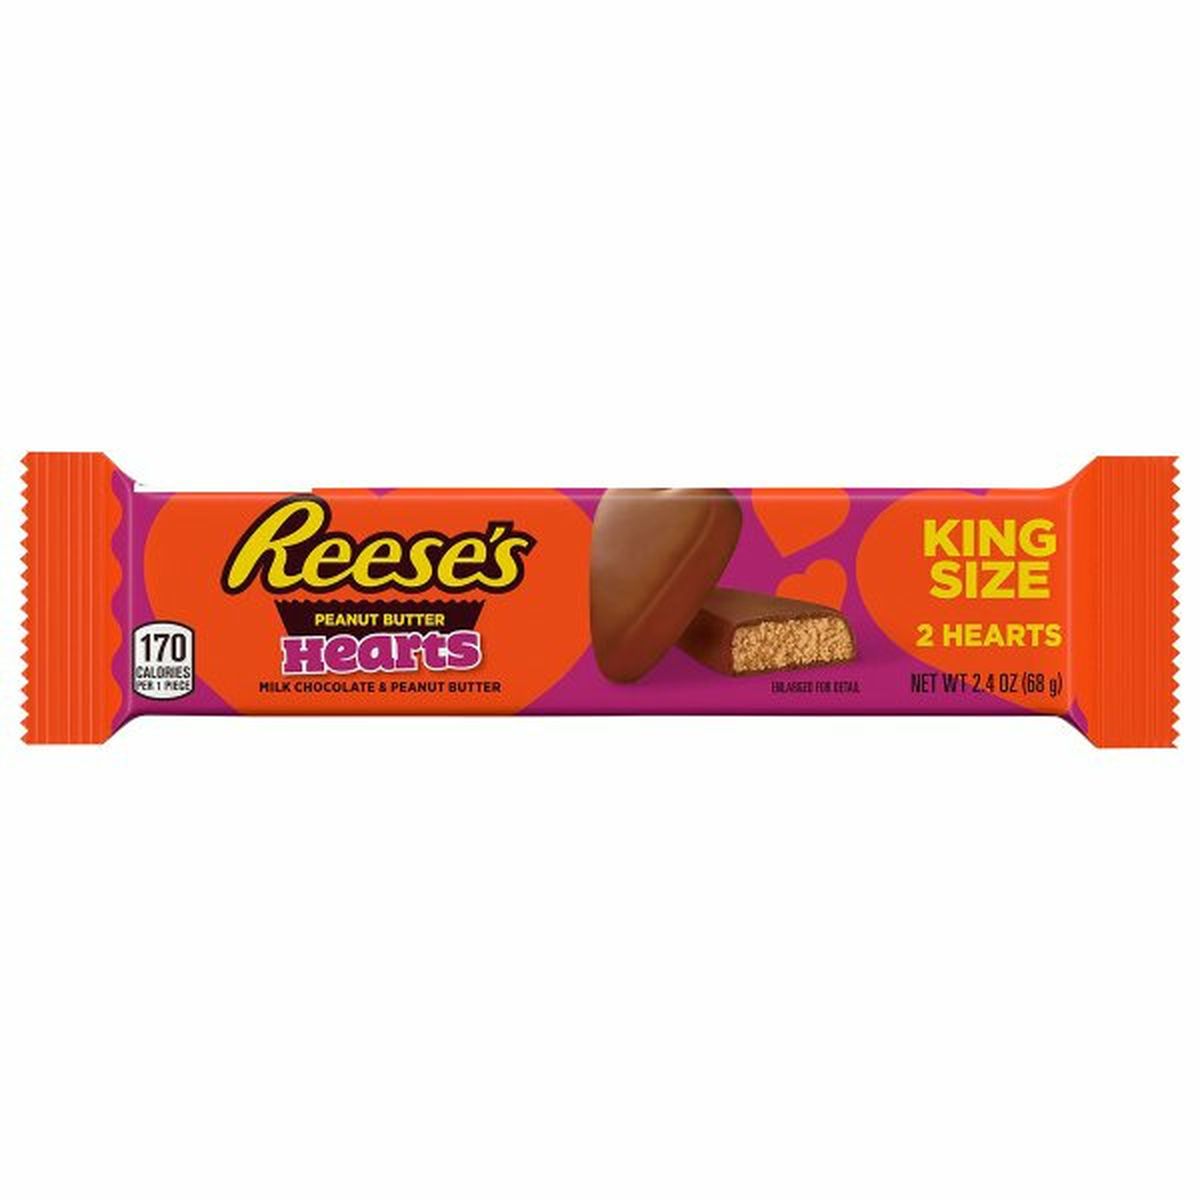 Calories in Reese's Peanut Butter, Hearts, King Size